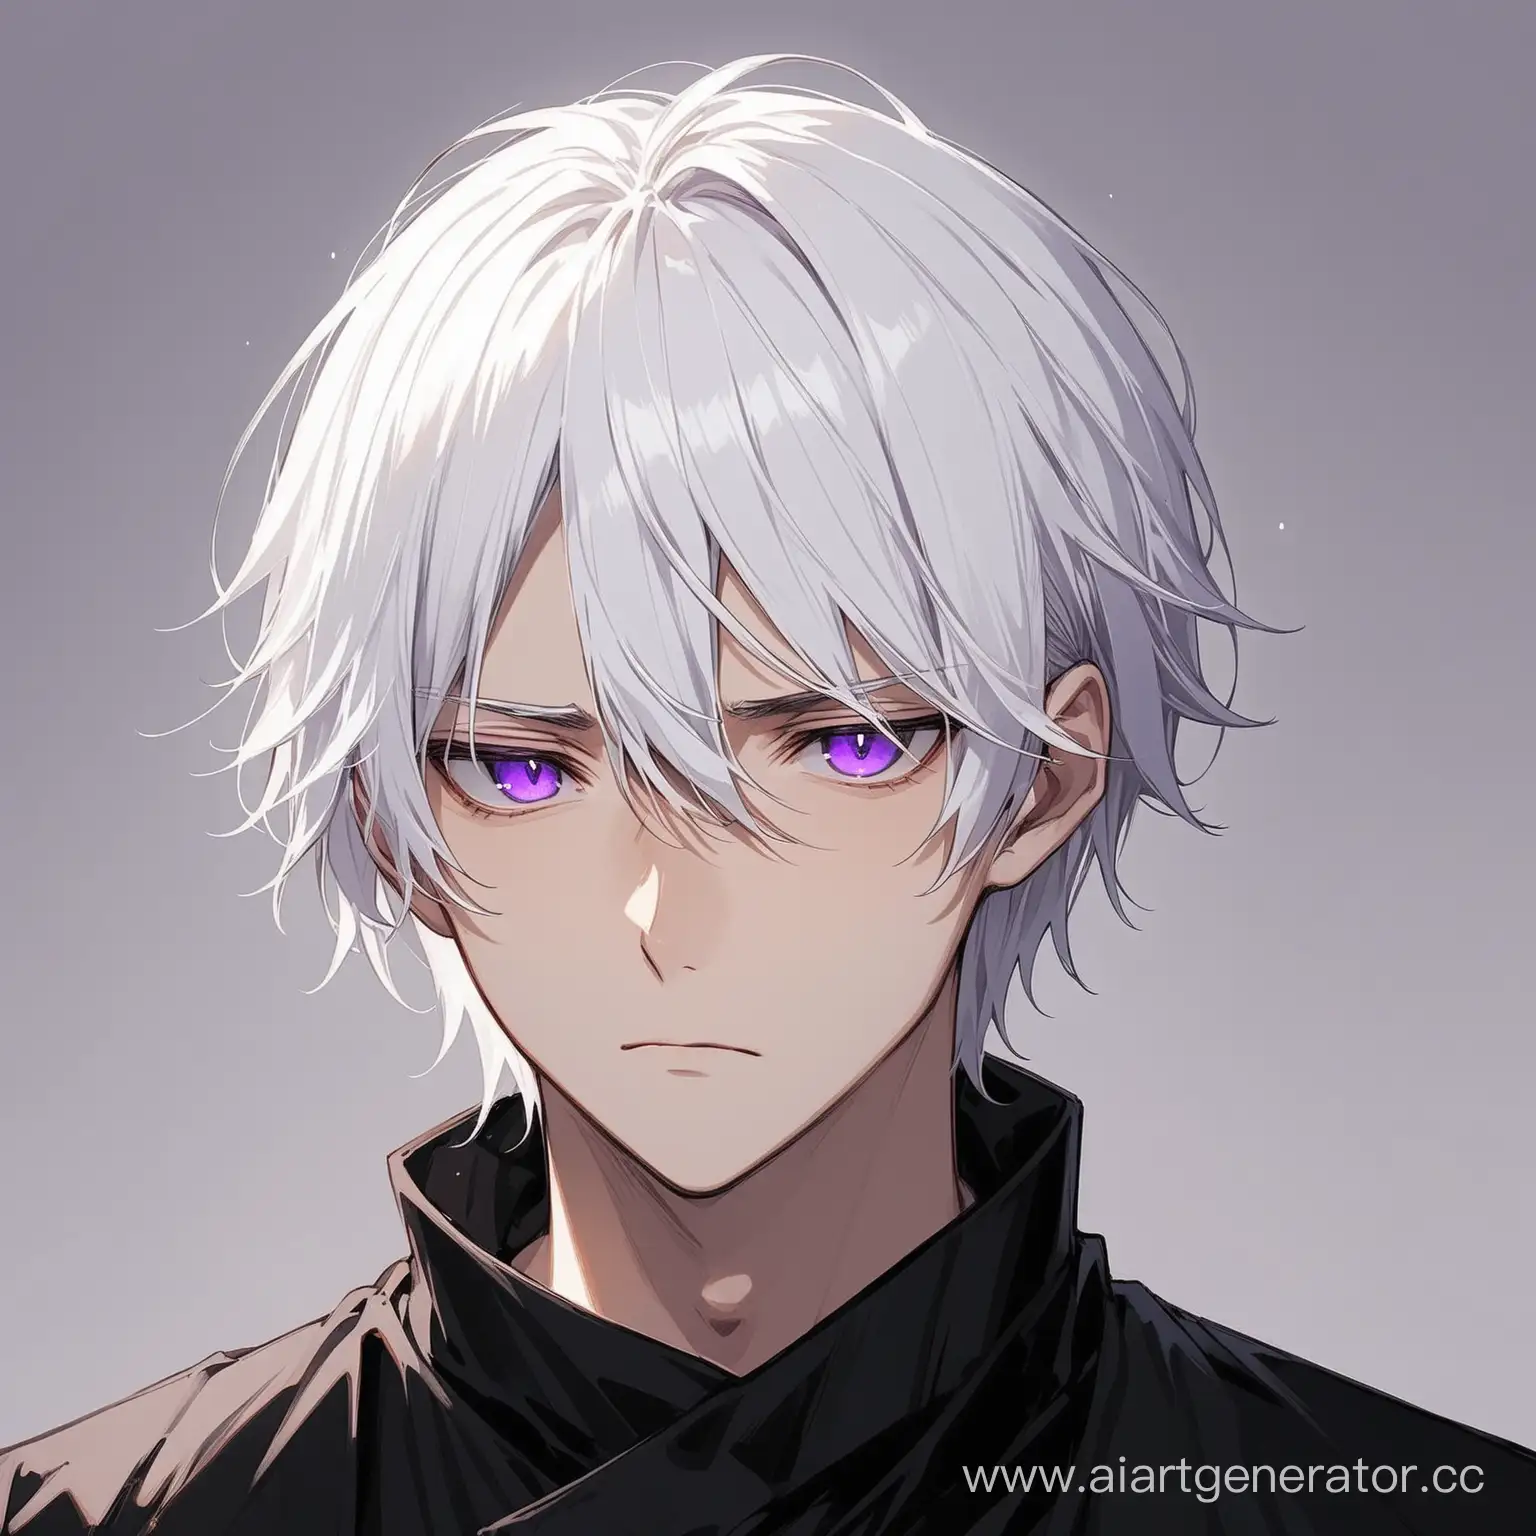 Mysterious-Figure-with-White-Hair-and-Purple-Eyes-in-Black-Attire